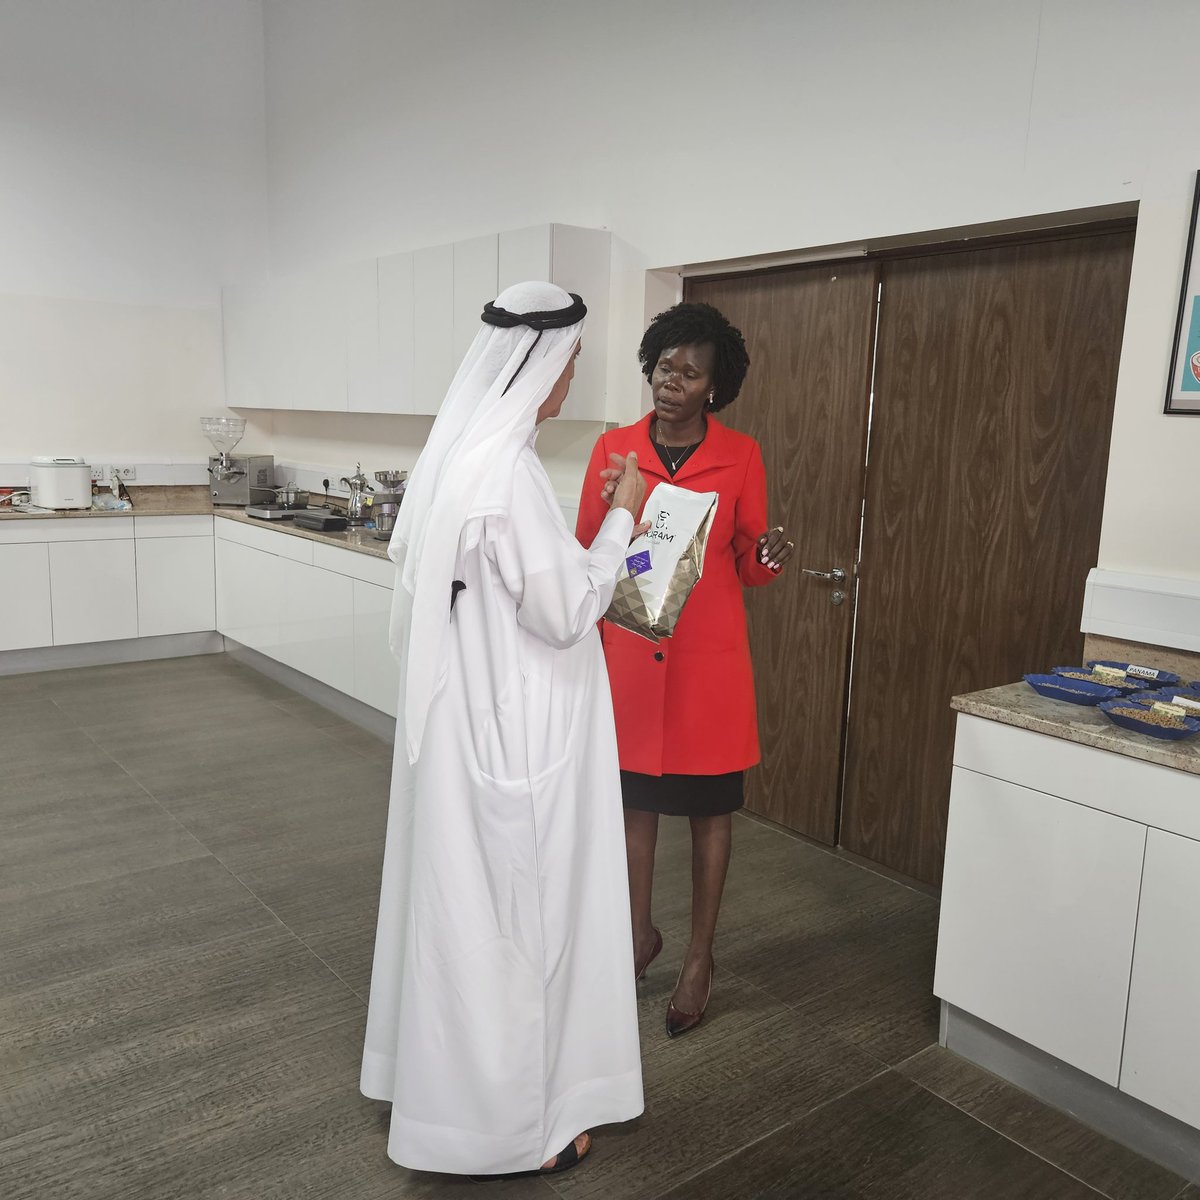 We visited KARAM factory in Dubai at the recondition of @ThaniAlZeyoudi they do value addition on ugandan coffee.they import 40mtn of coffee every month to UAE,they have also employed a ugandan in the company, i hope to see them establish a factory in uganda soon.